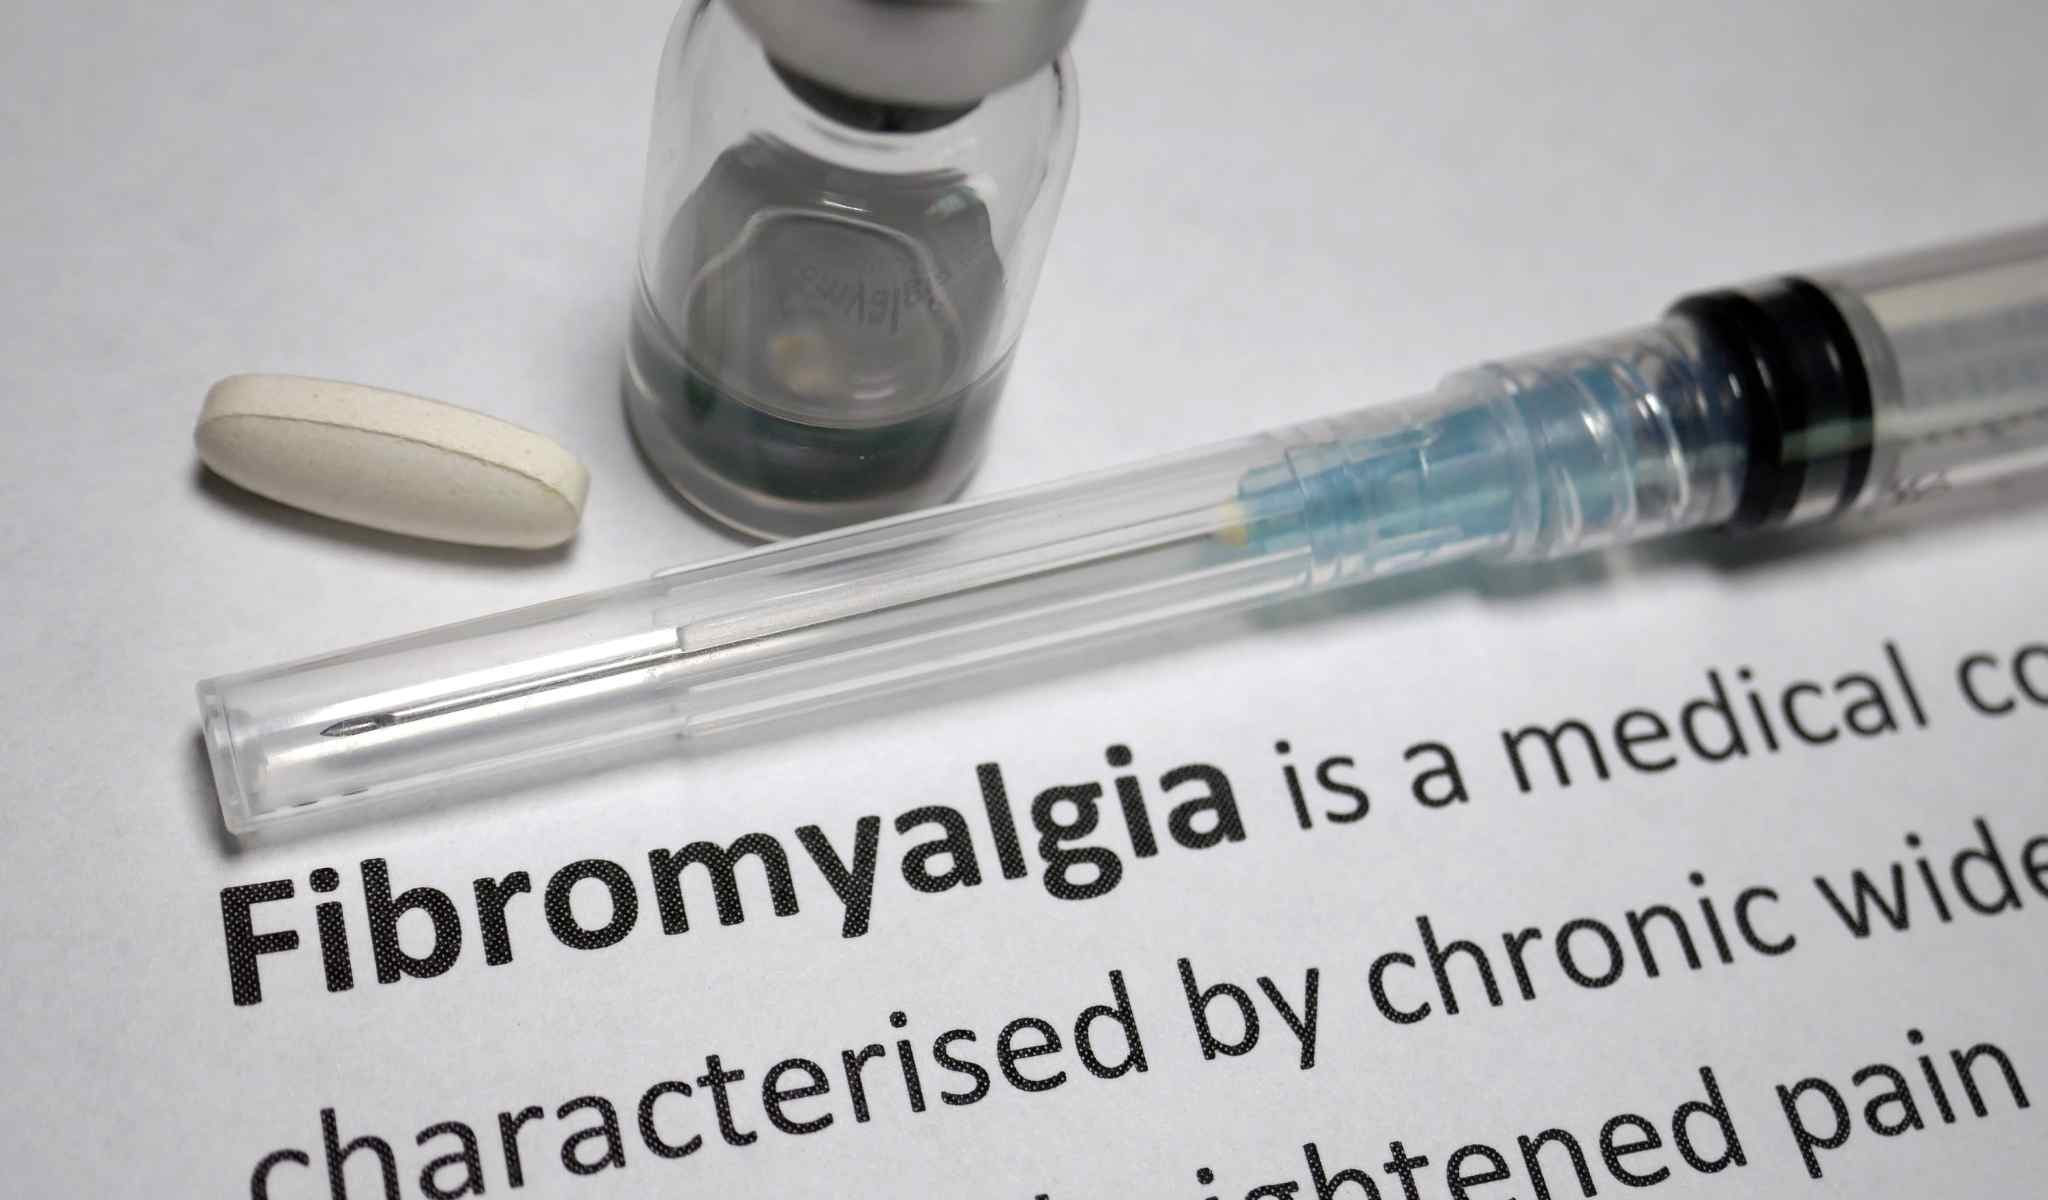 CBD Oil May Help Fibromyalgia: Here's What the Research Says